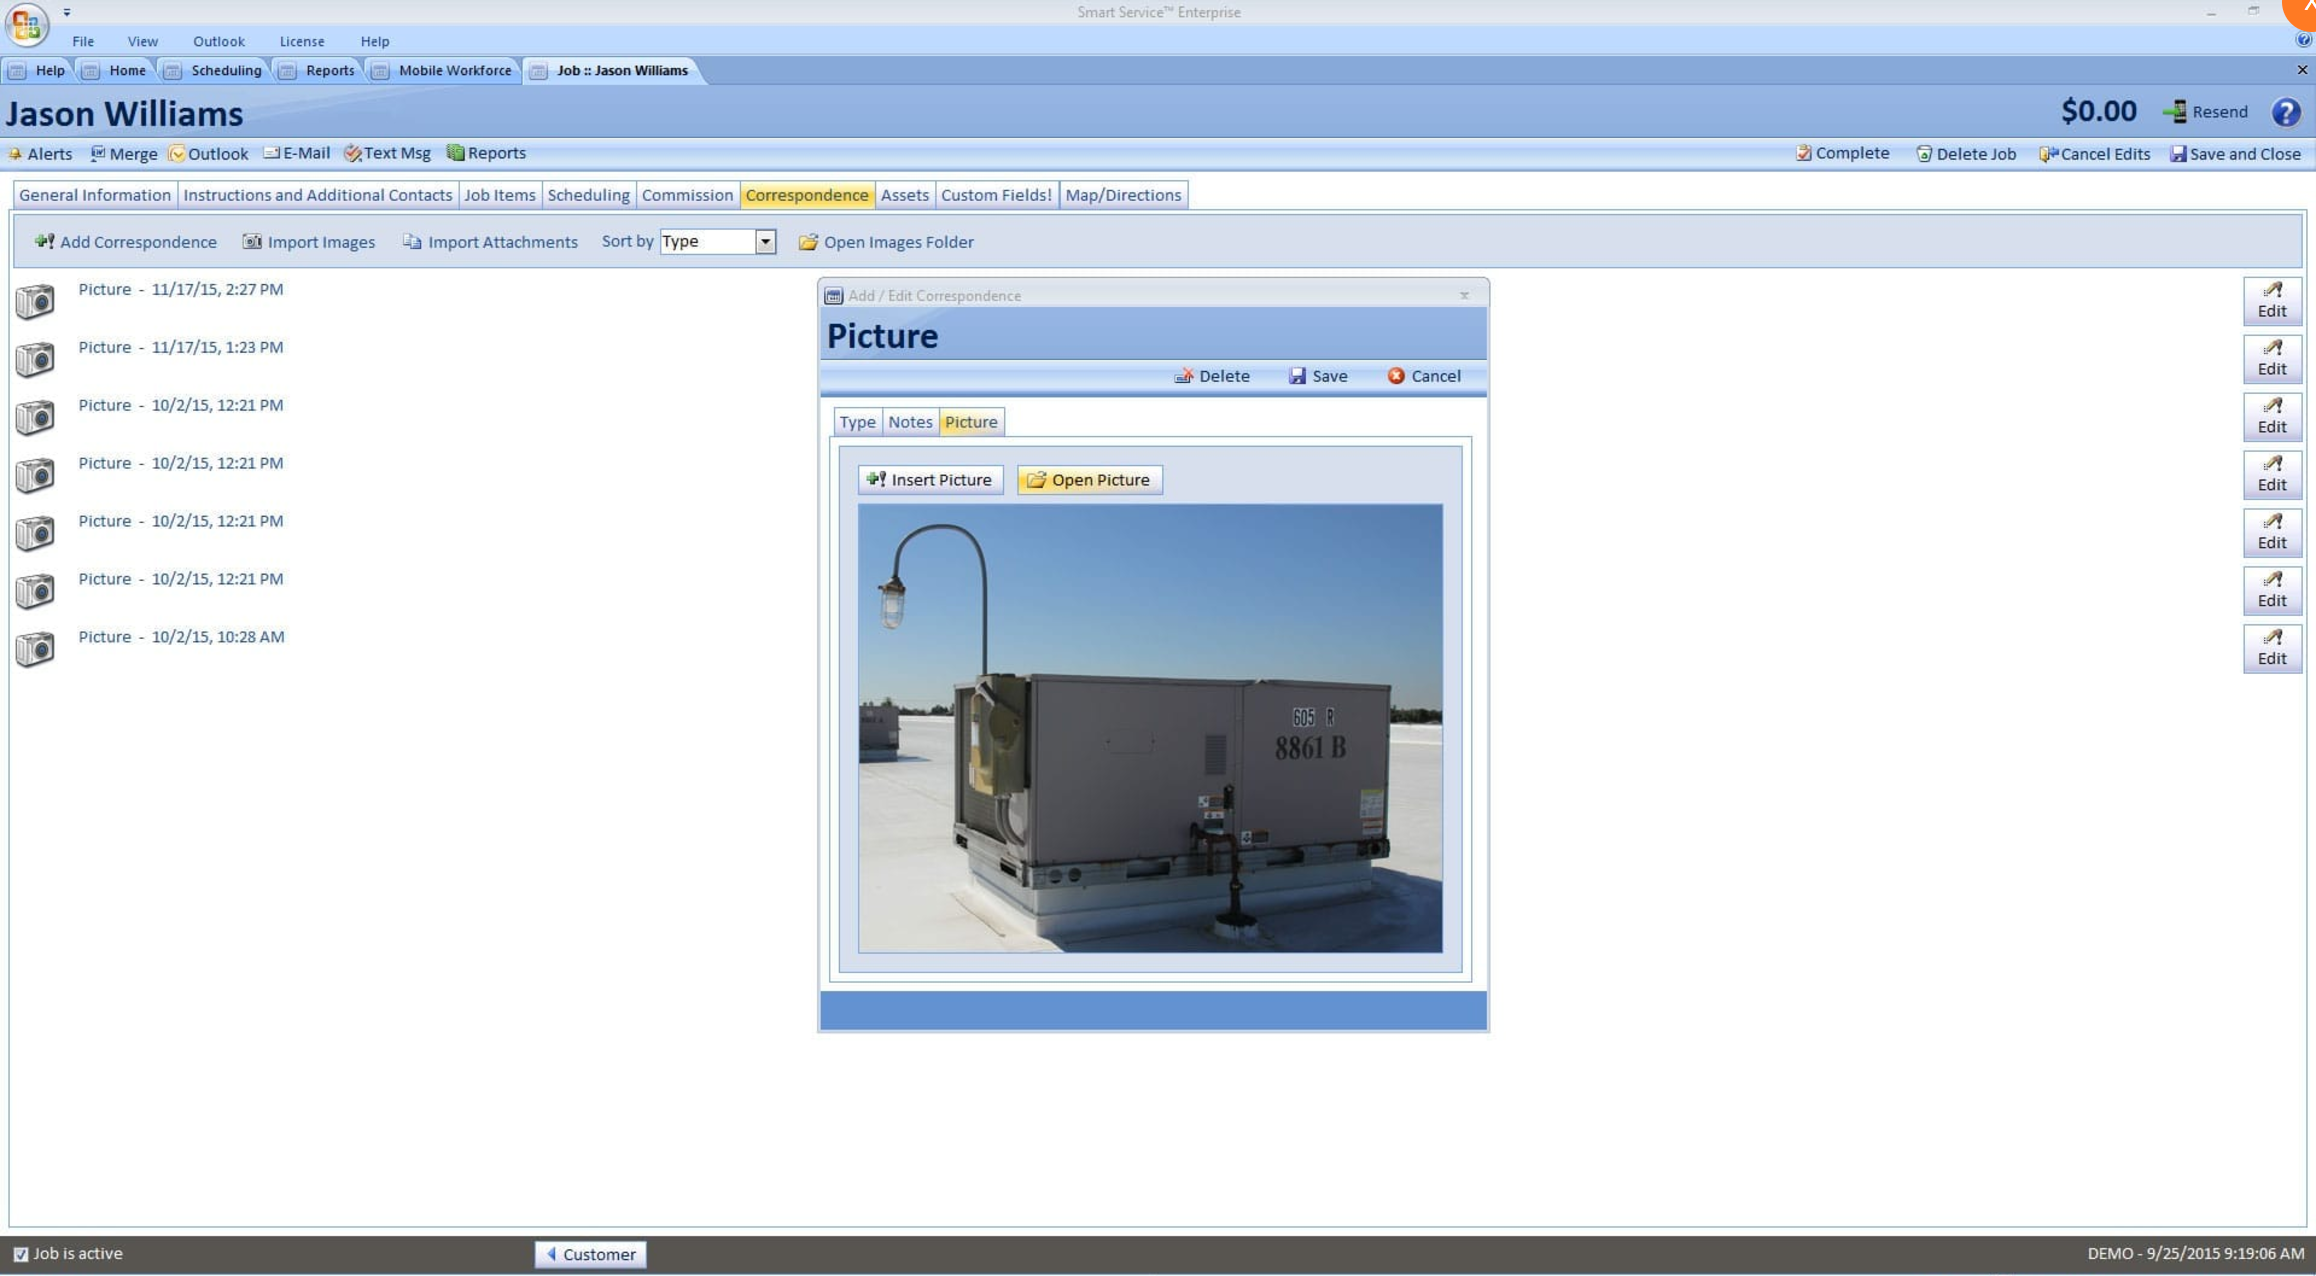 Smart Service Software - Add images to customer records and work orders.